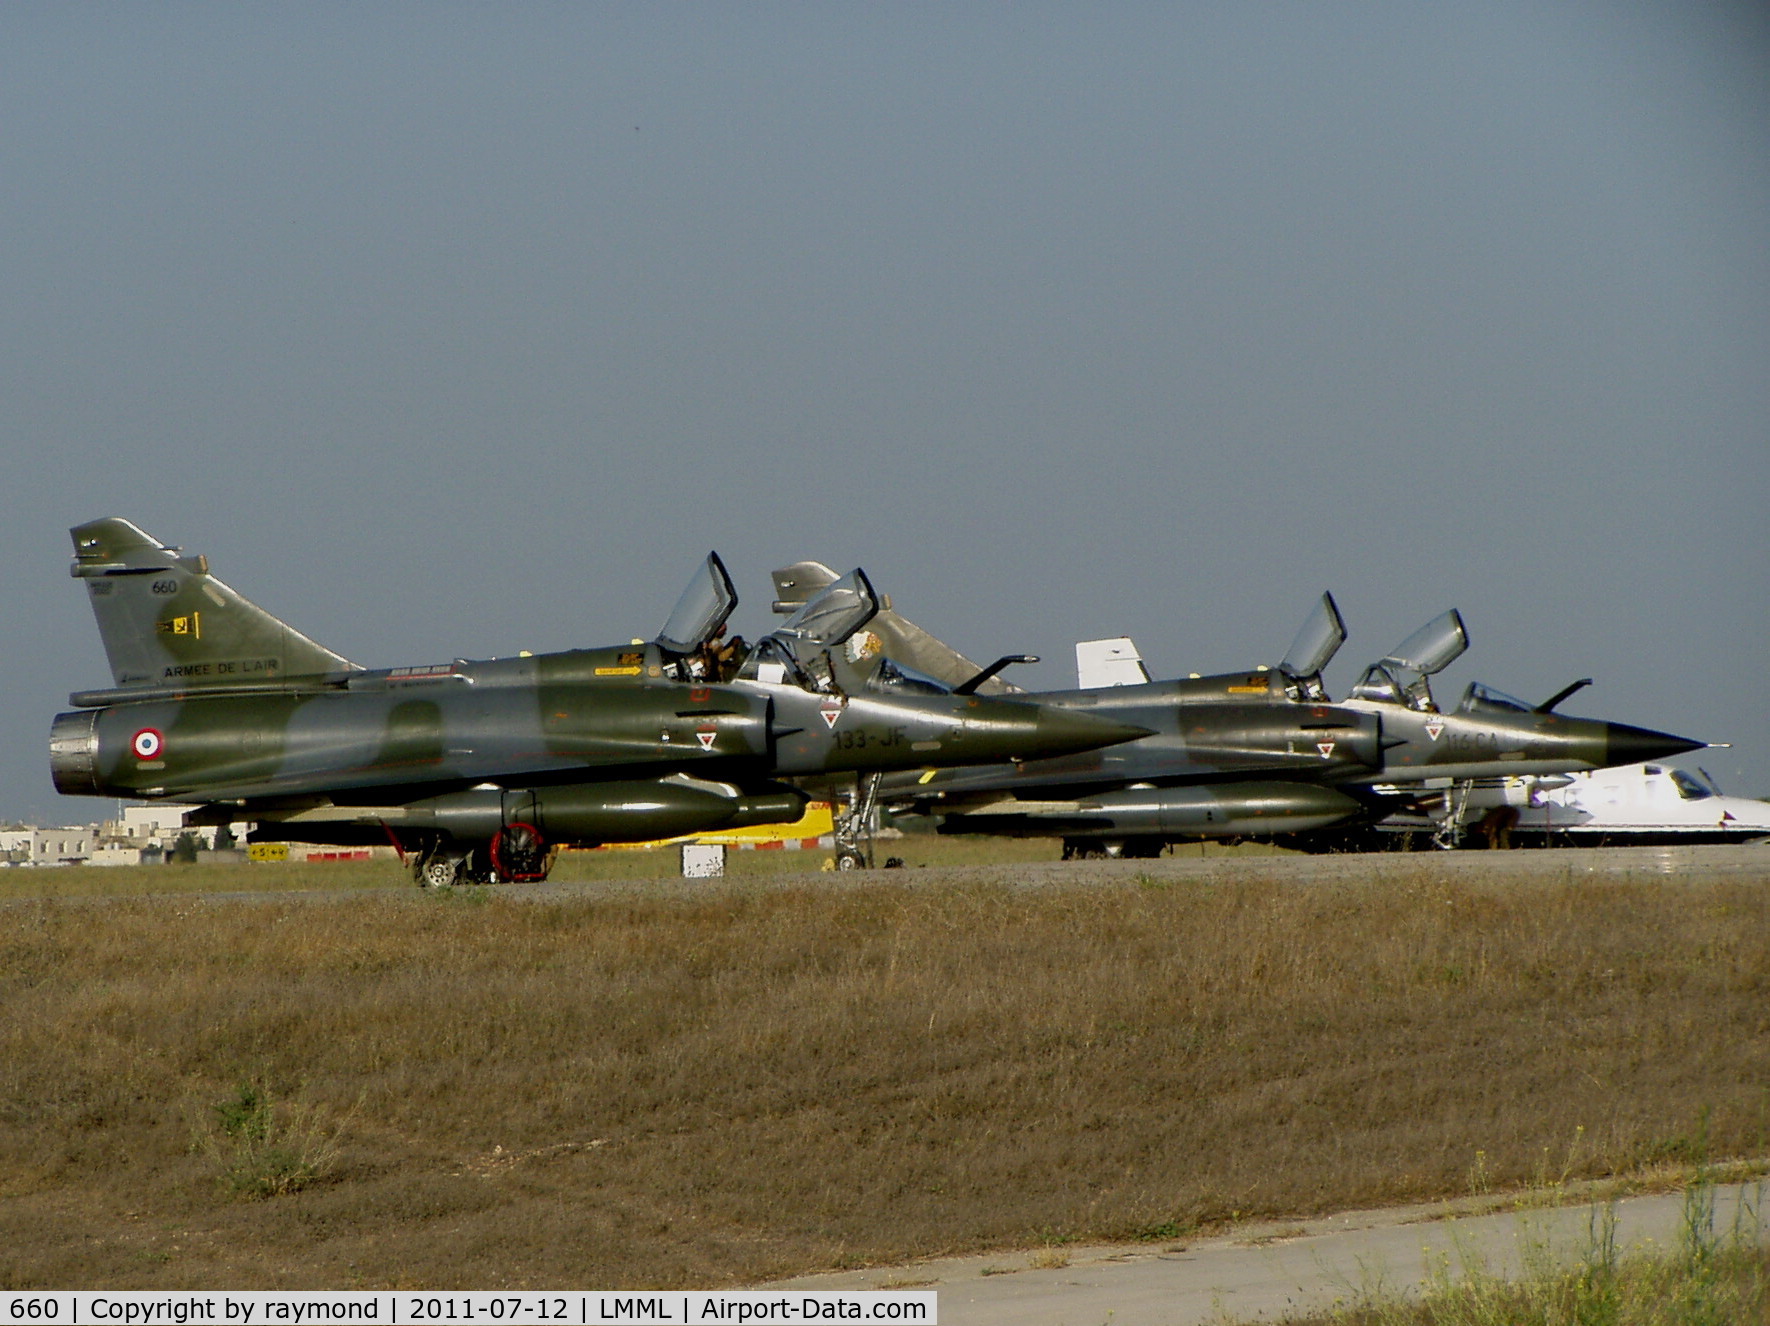 660, Dassault Mirage 2000D C/N 534, Mirage2000 660 and 304 of French Air Force diverted to Malta because of technical problems.